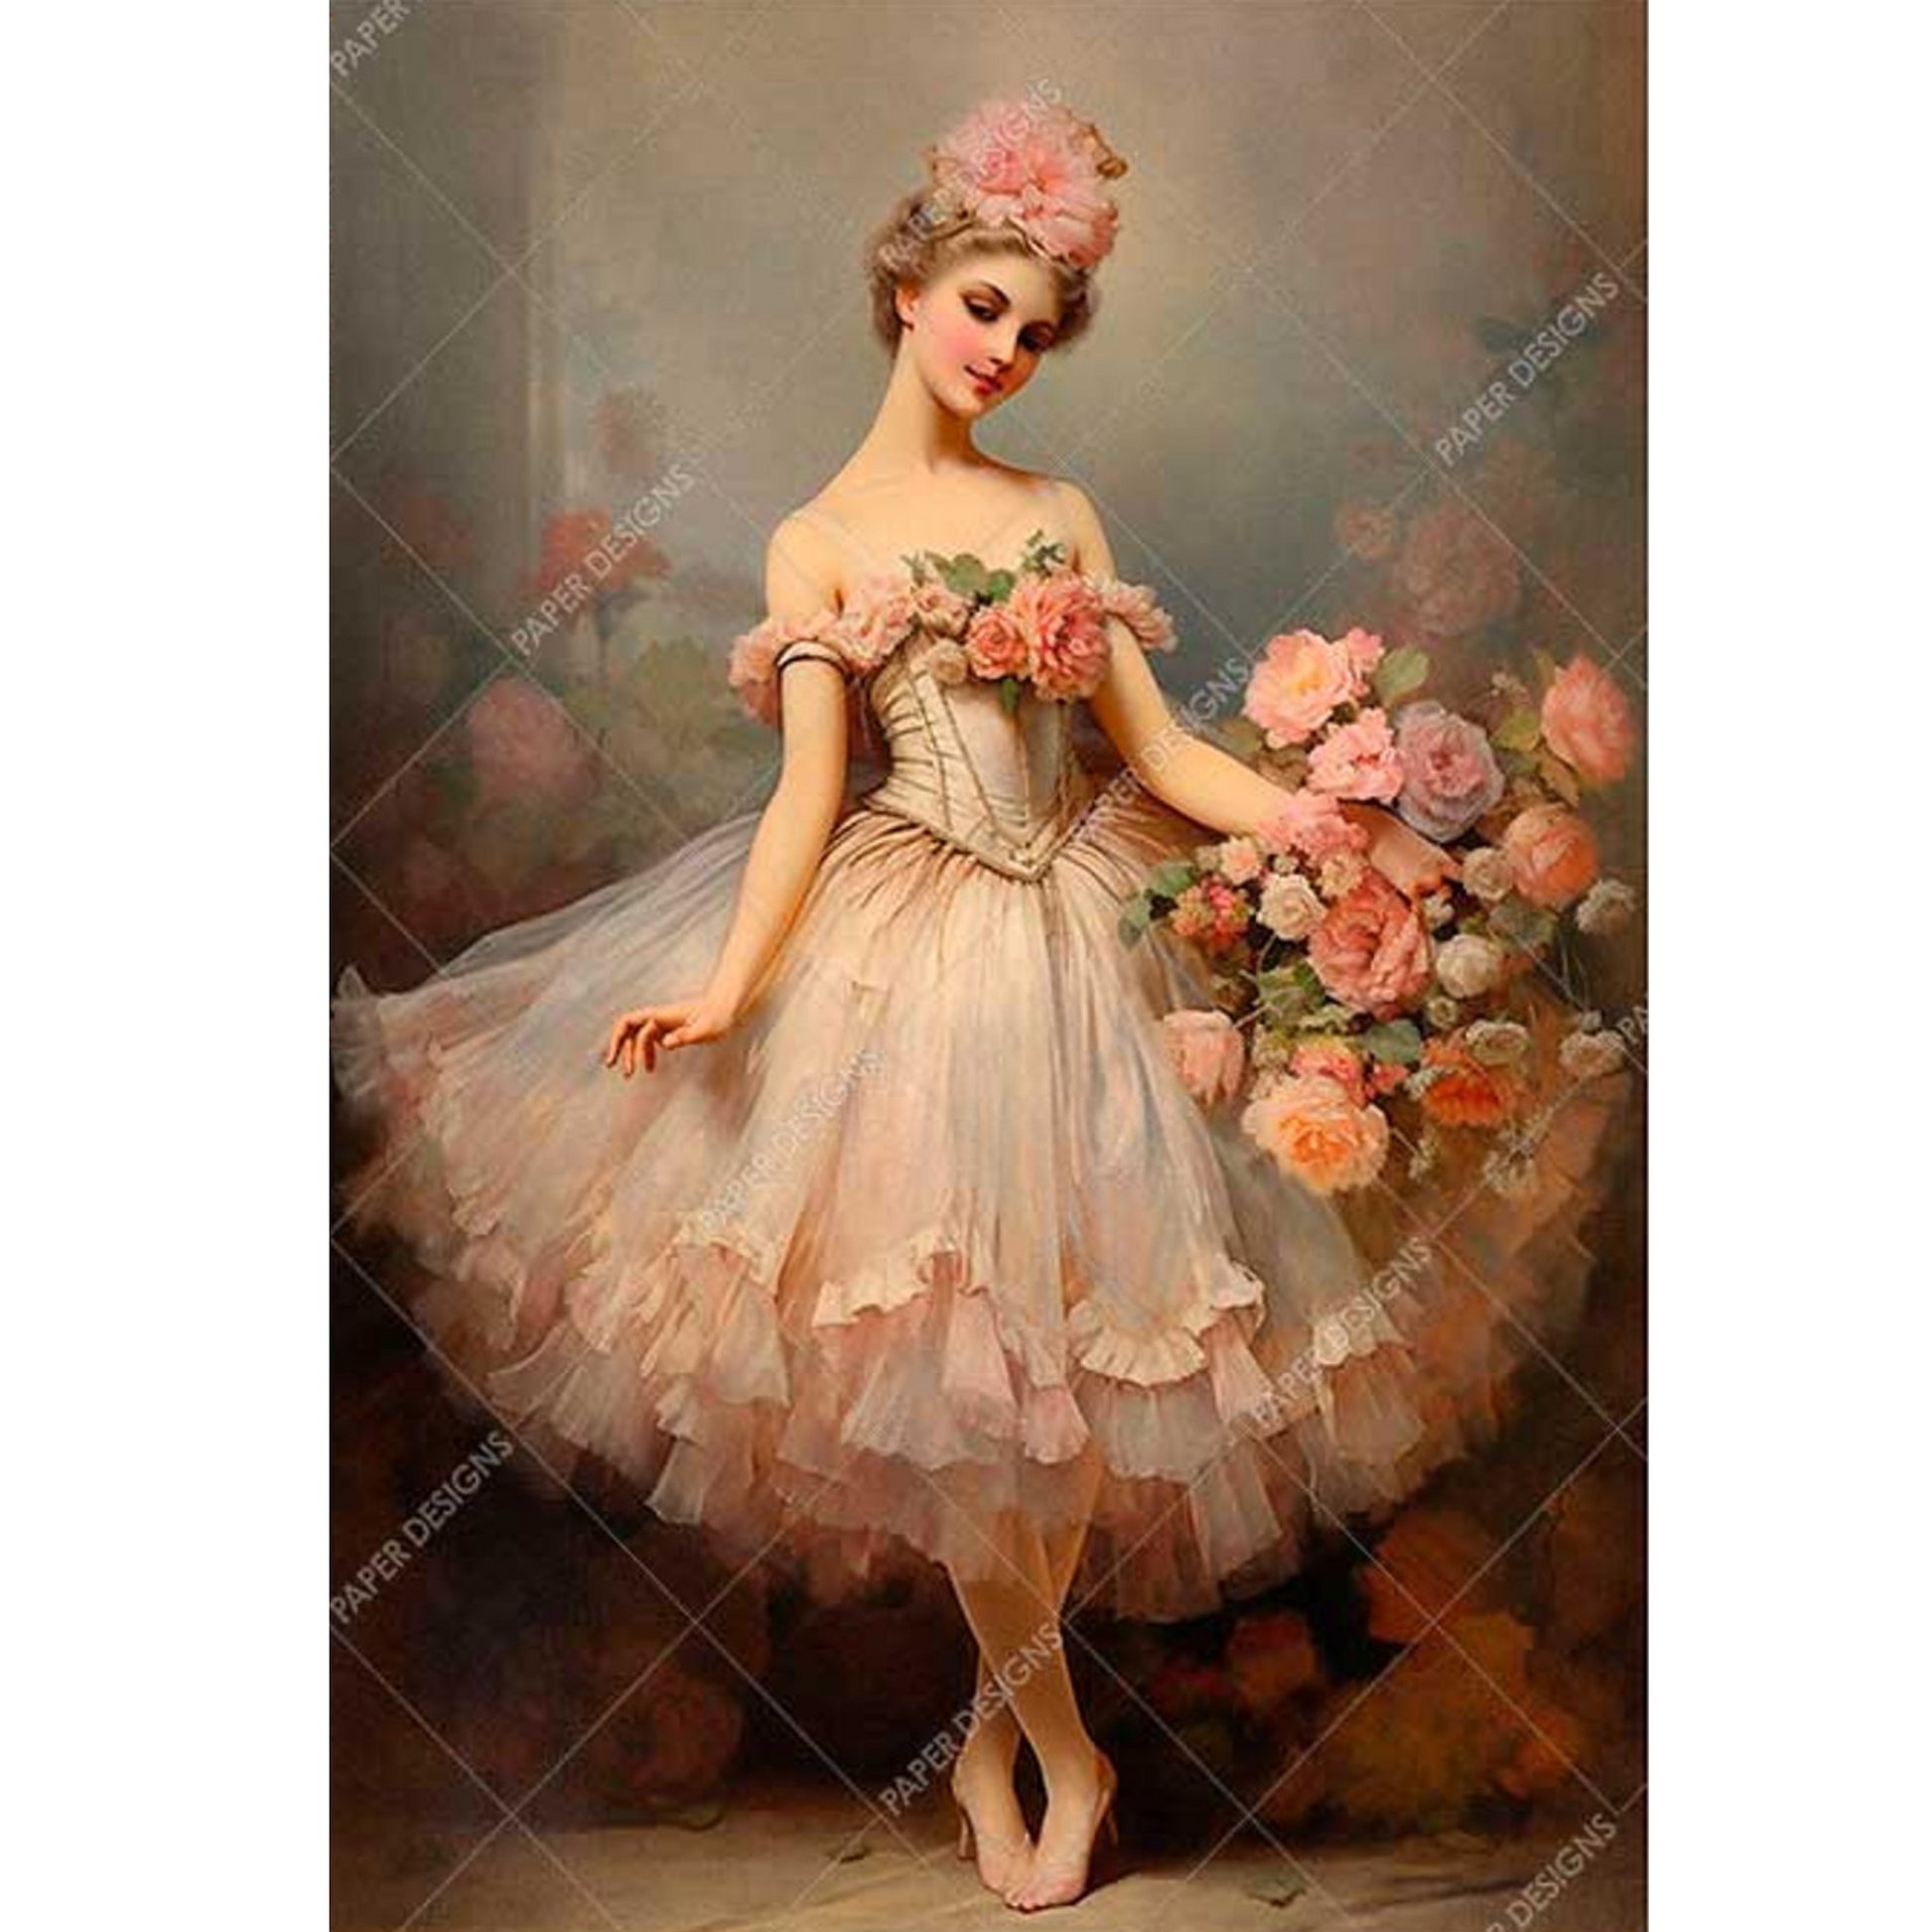 "Victorian Shabby Chic Ballerina" decoupage rice paper by Paper Designs. Available at Milton's Daughter.